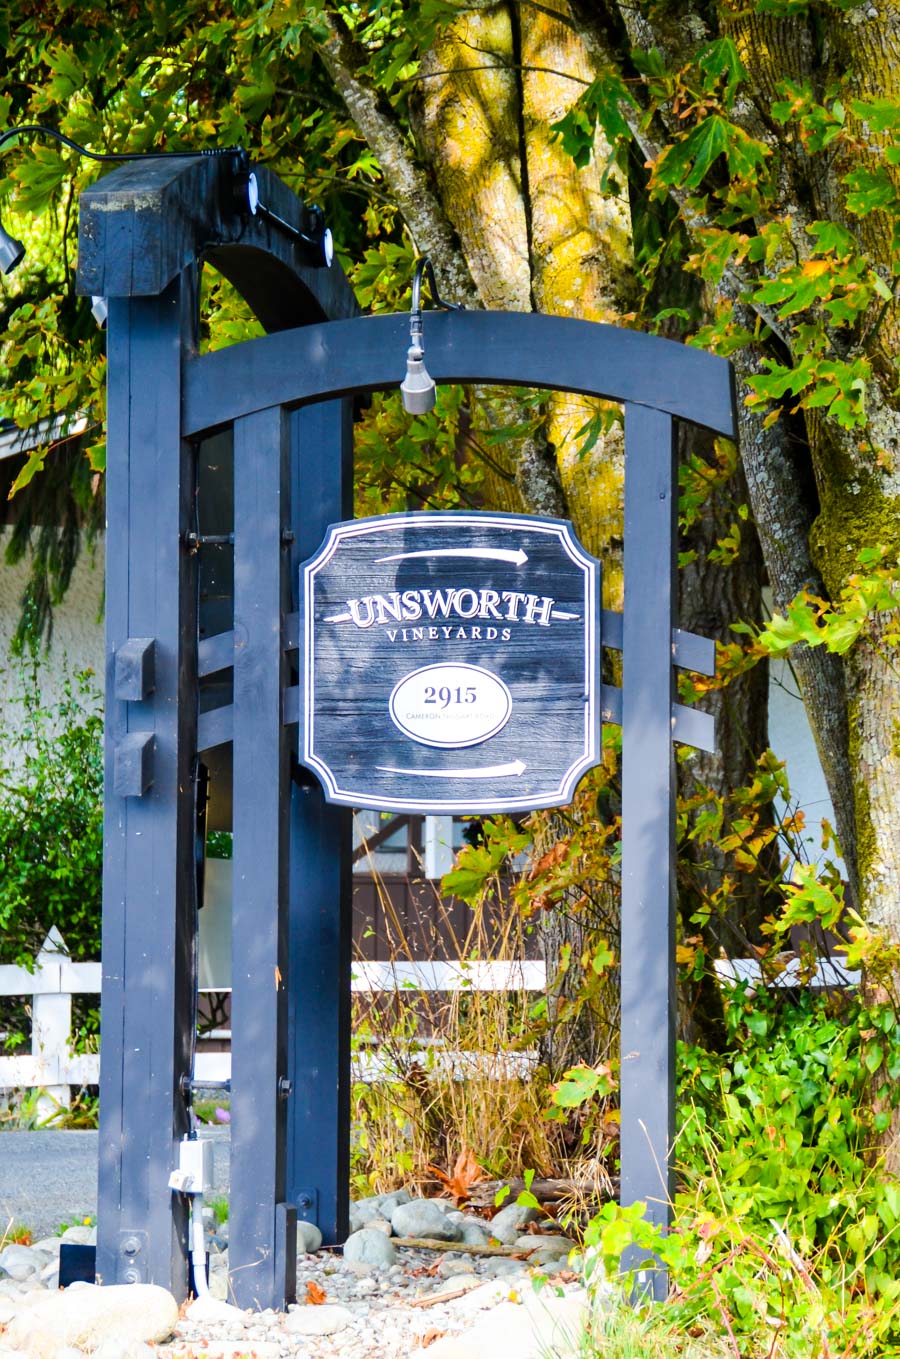 What to Do in Victoria, B.C. Travel Guide | Unsworth Winery